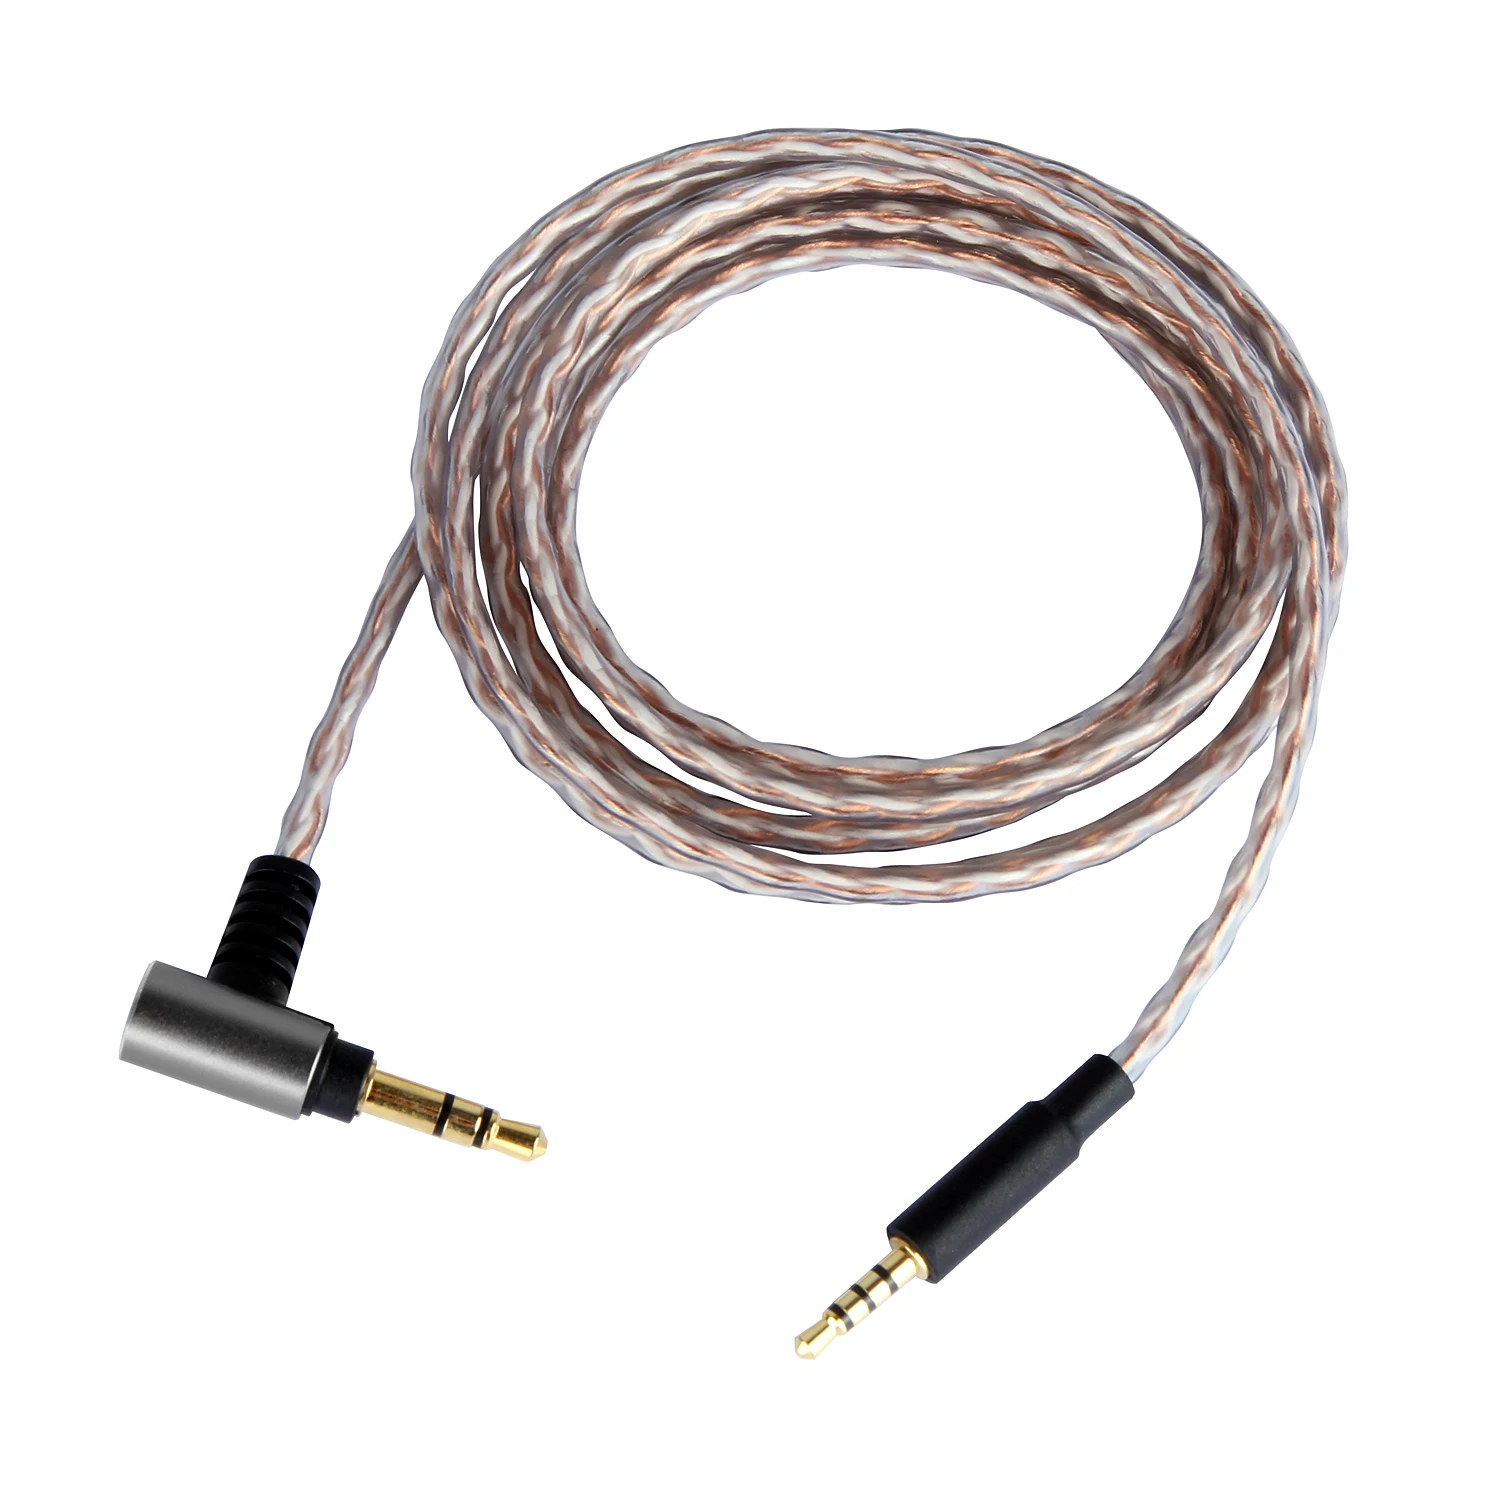 

New! 4-core braid OCC Audio Cable For JBL Synchros S500 S700 S300 S400BT E500BT E45BT E50BT E55BT E30 headphones